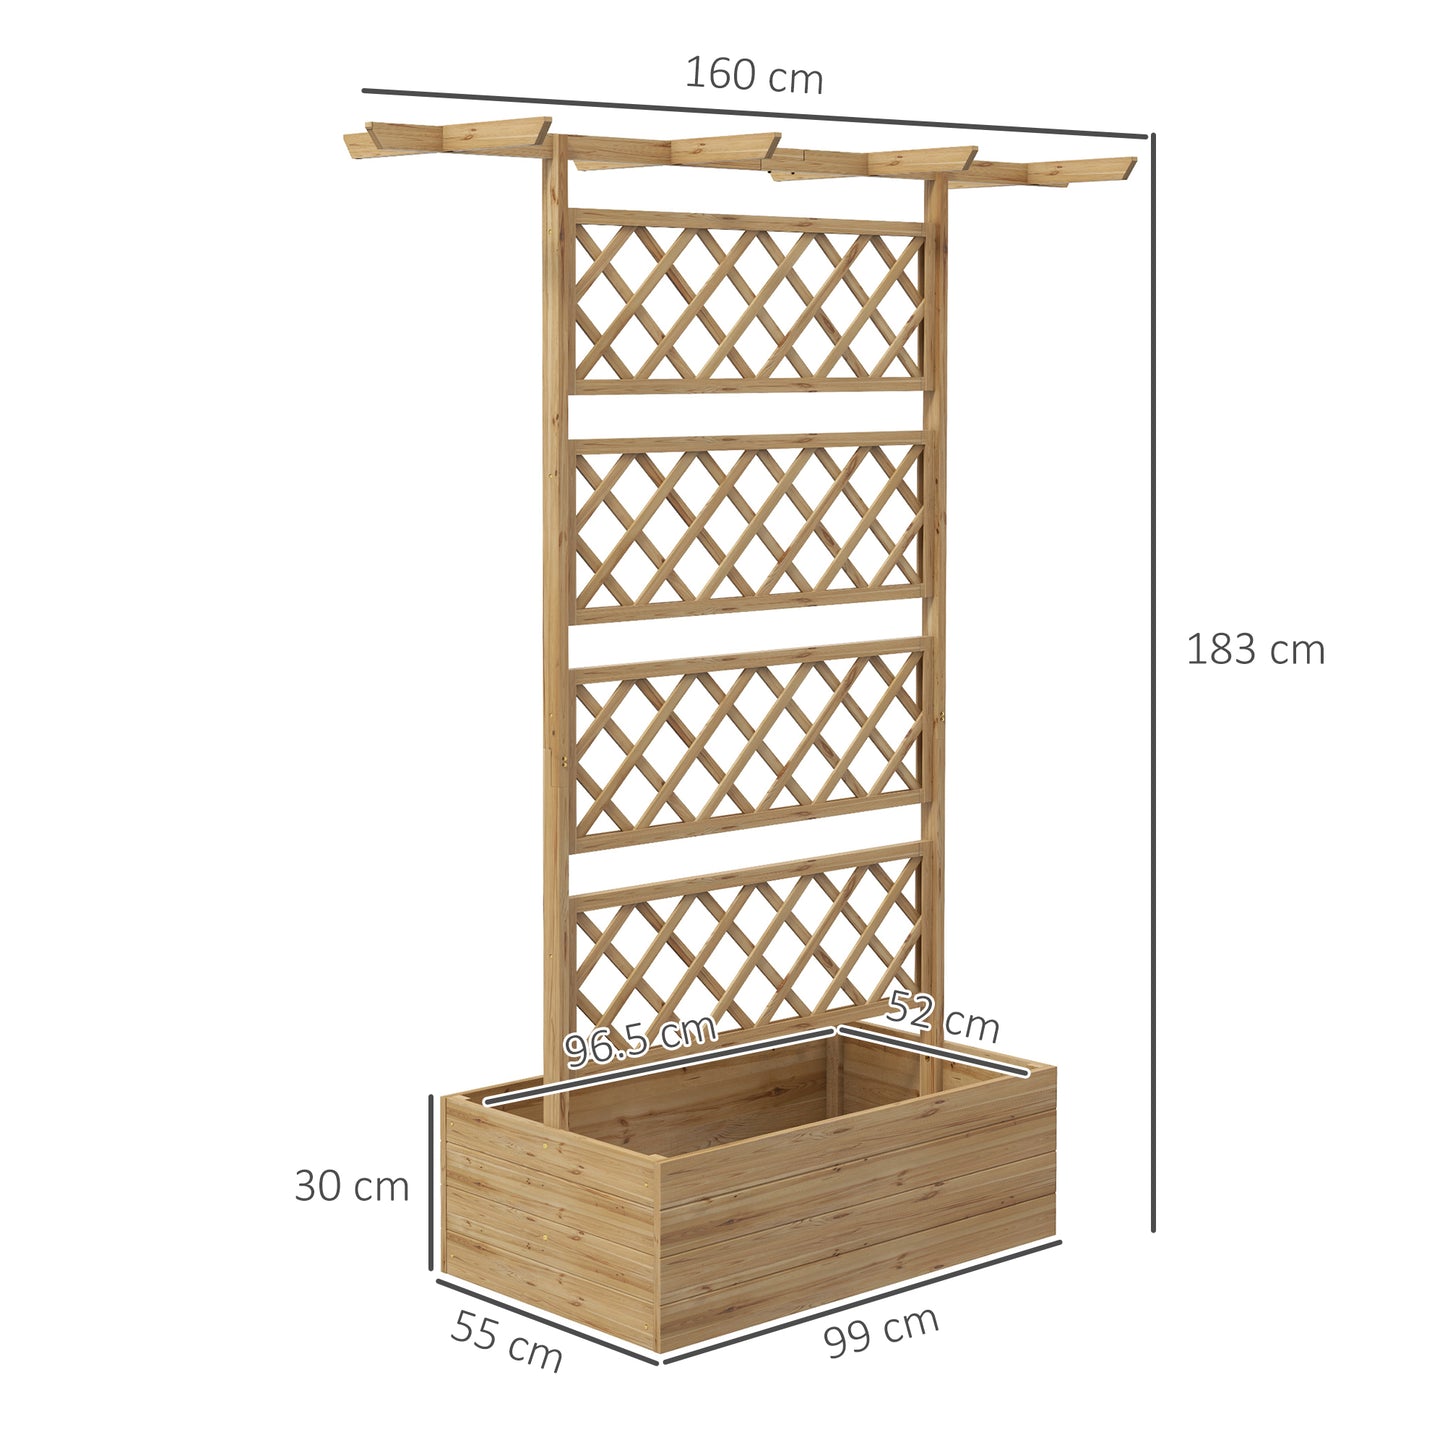 Outsunny Wooden Trellis Planter Box, Raised Garden Bed to Grow Vegetables, Herbs and Flowers, Natural Tone